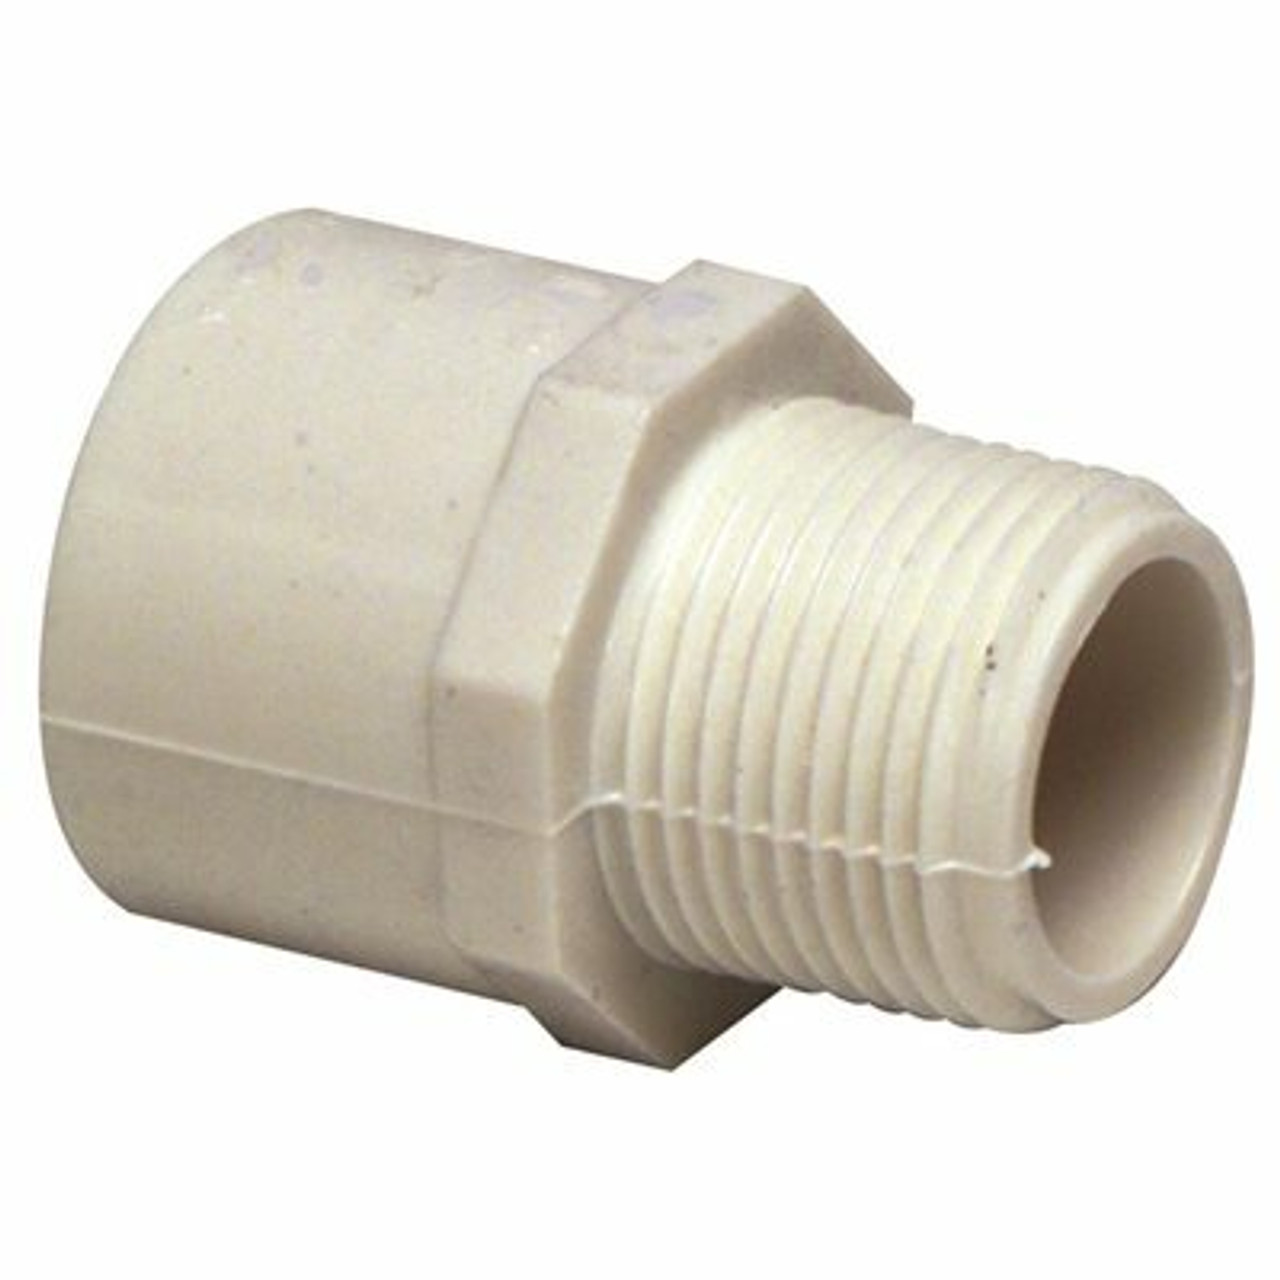 Proplus Pvc Male Adapter, 3/4 In.